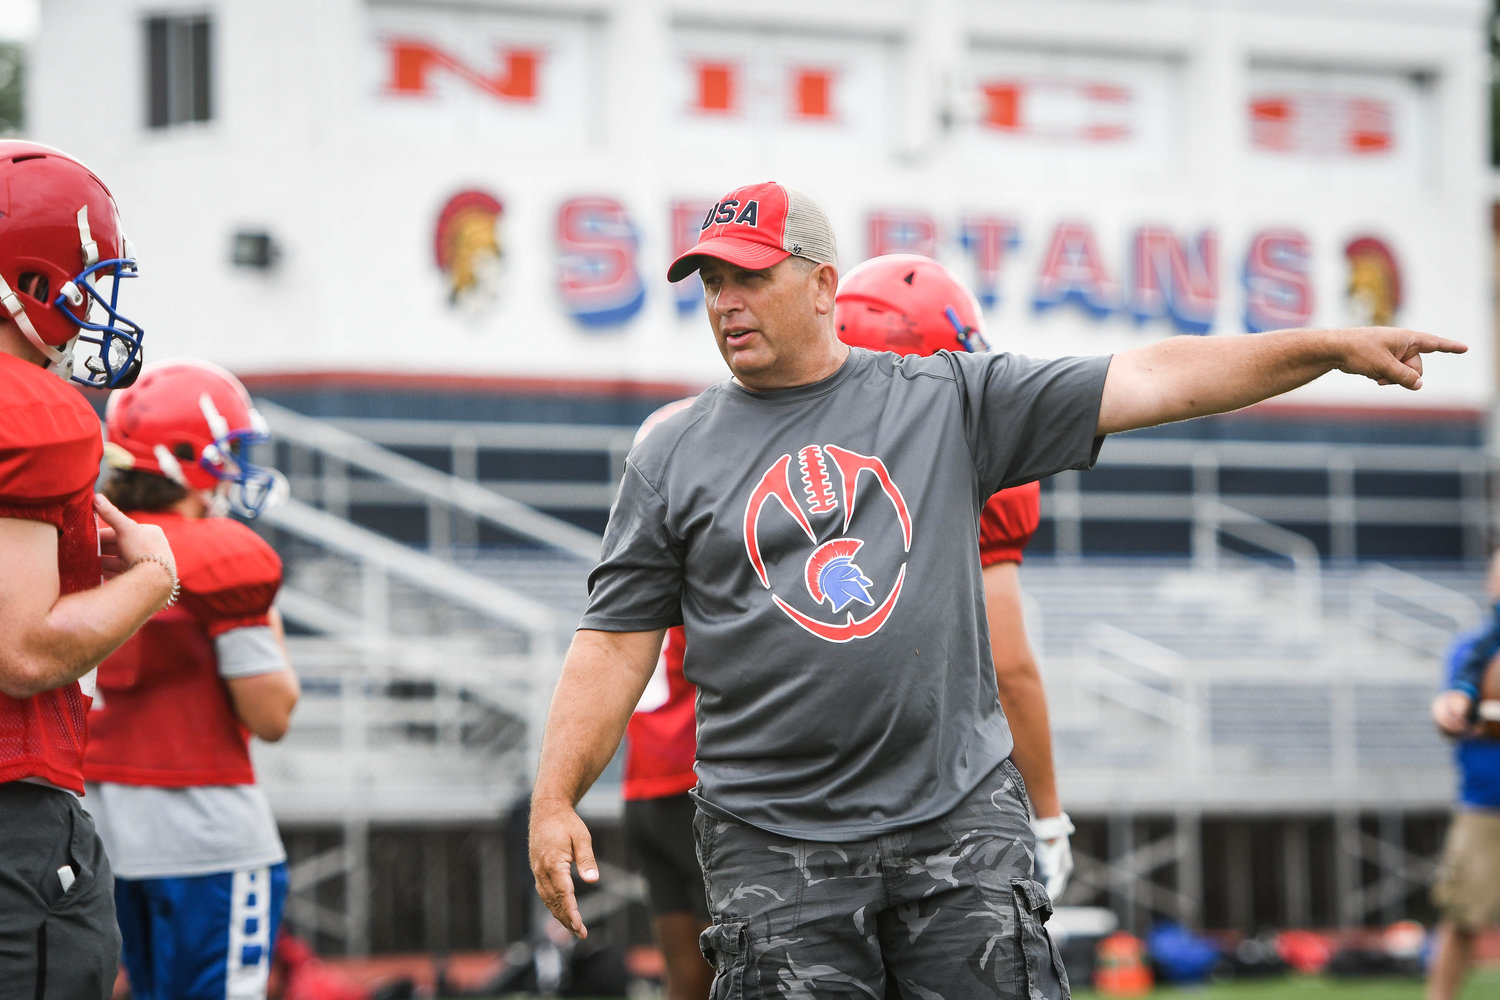 MAKING A POINT — New Hartford assistant coach Keith Kempney instructs players during a seven-on-seven football camp on Tuesday at Don Edick Field in New Hartford. The Spartans open the 2022 season on the road against Rome Free Academy at 6:30 p.m. on Friday, Sept. 2, at RFA Stadium.